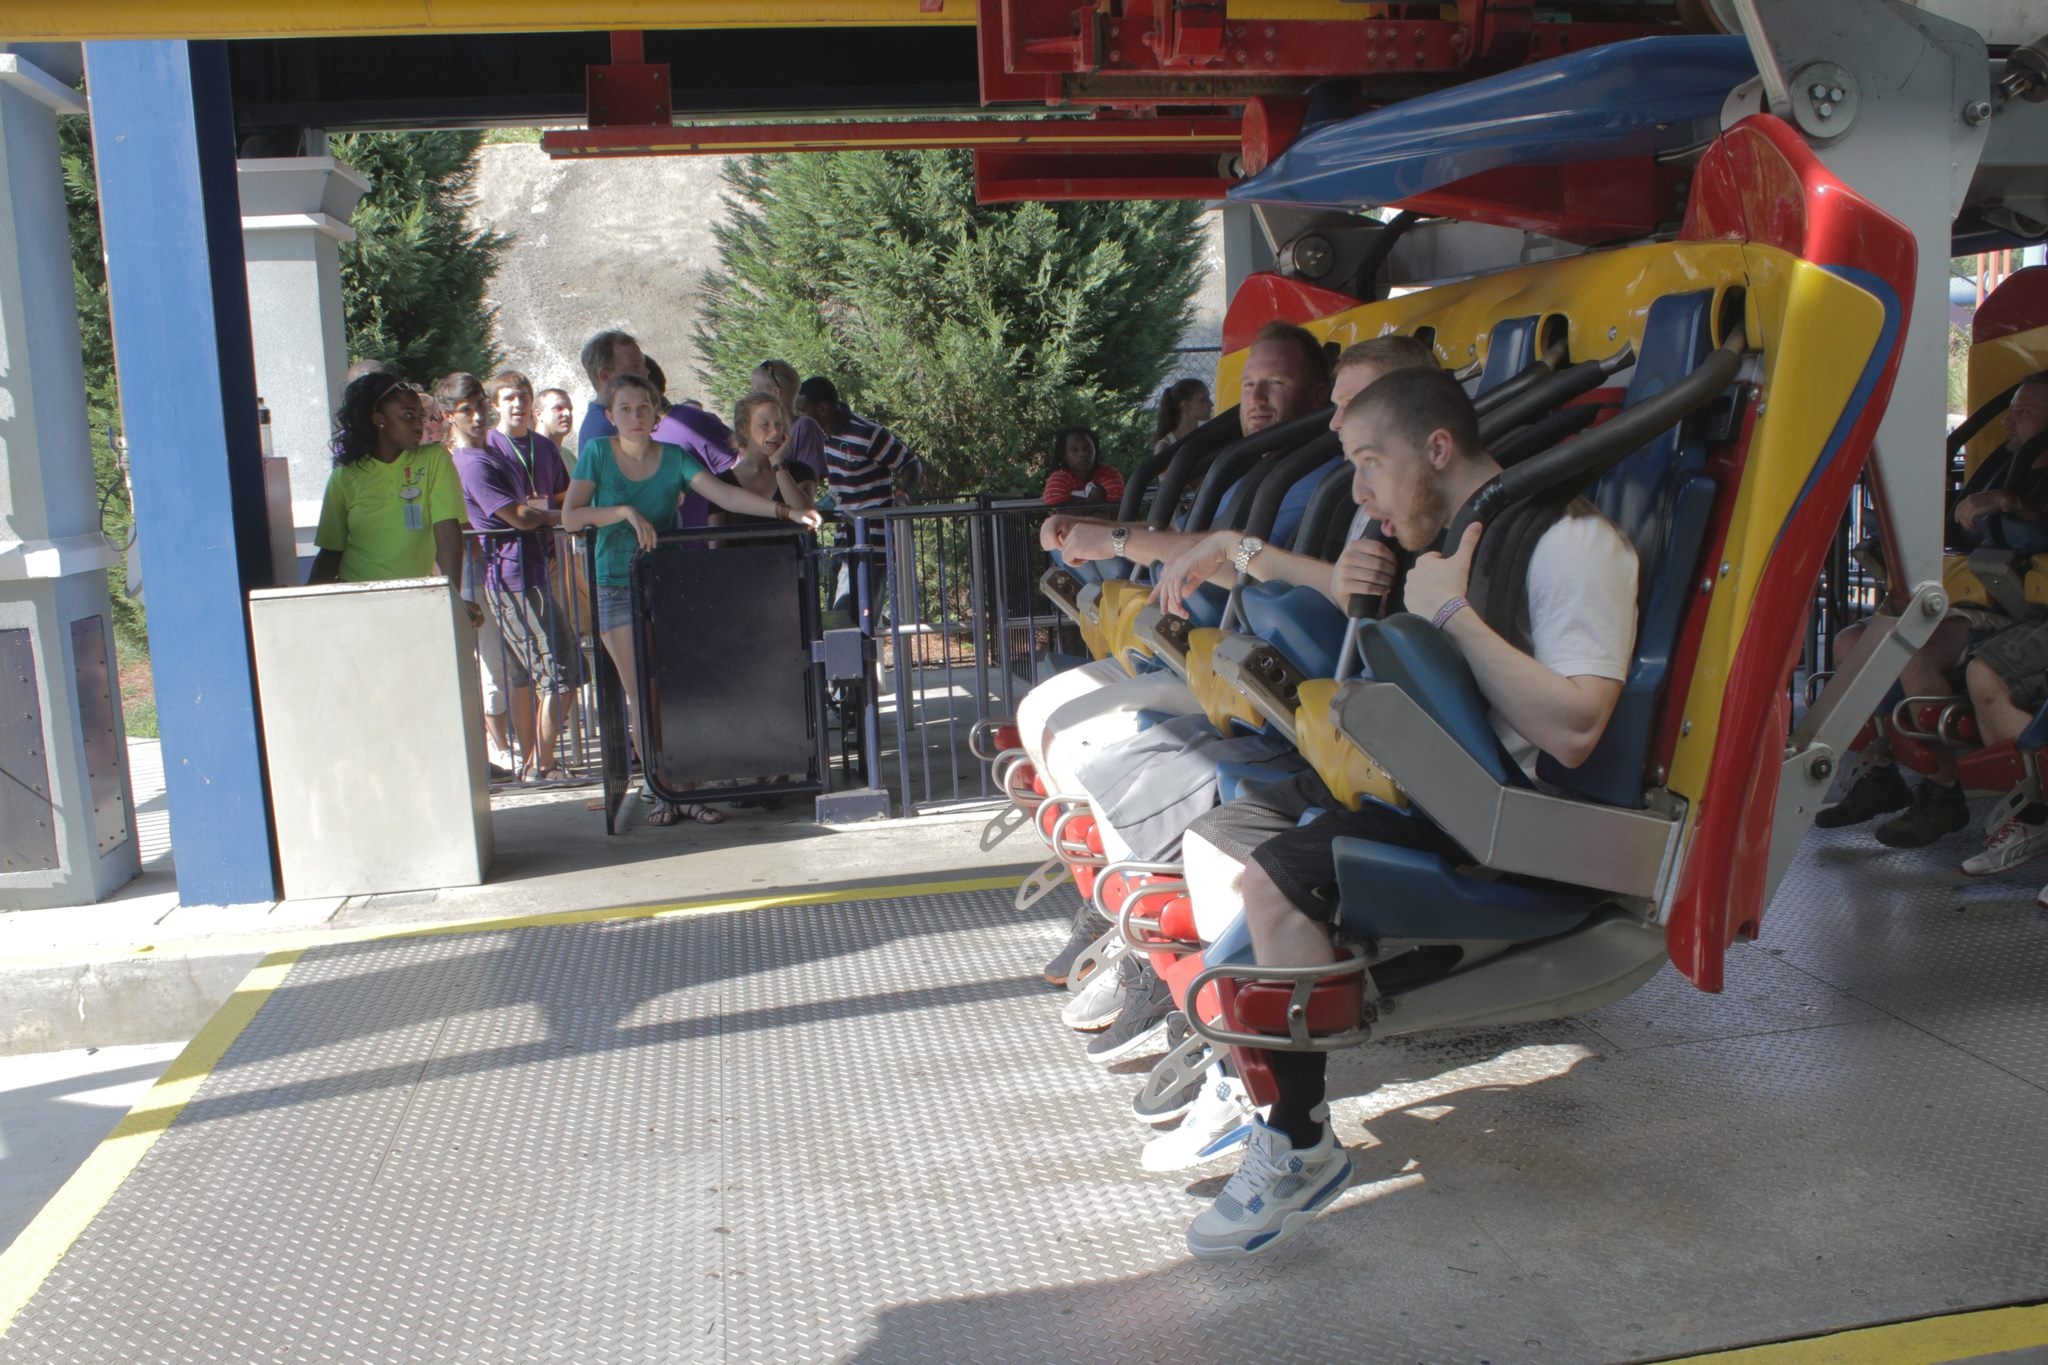 Mike Posner, Patrick Cline and Dan Weisman on a roller coaster in 2011
